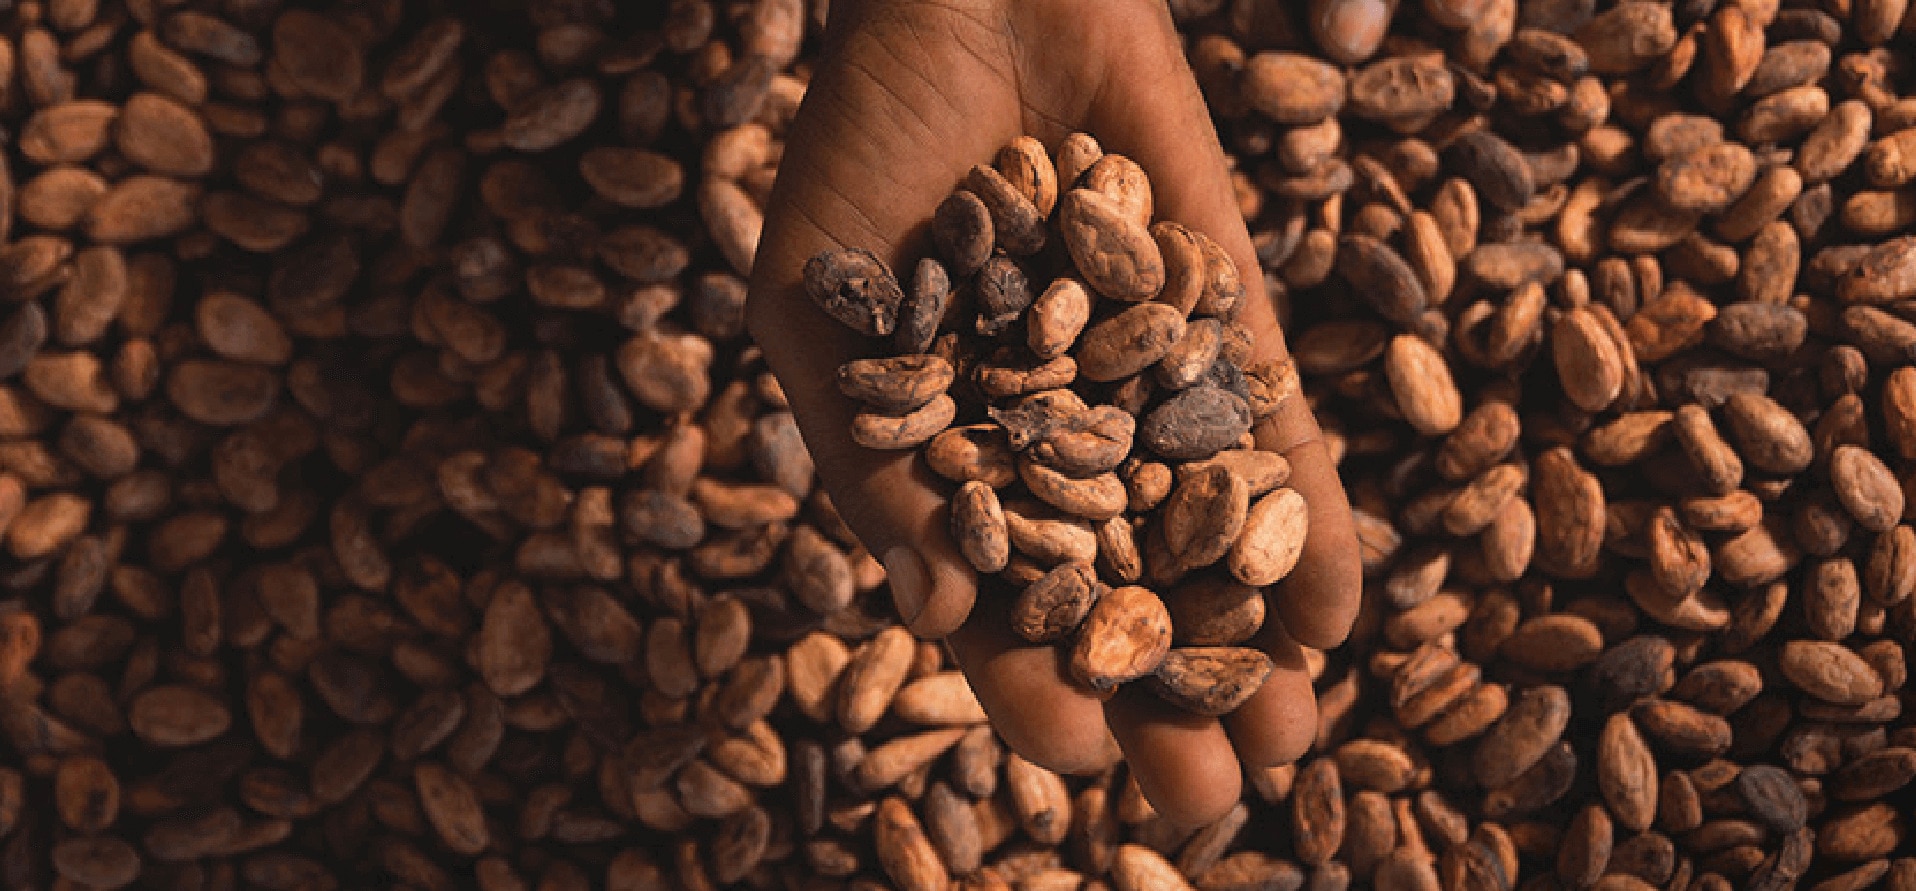 Handful of roasted cocoa beans